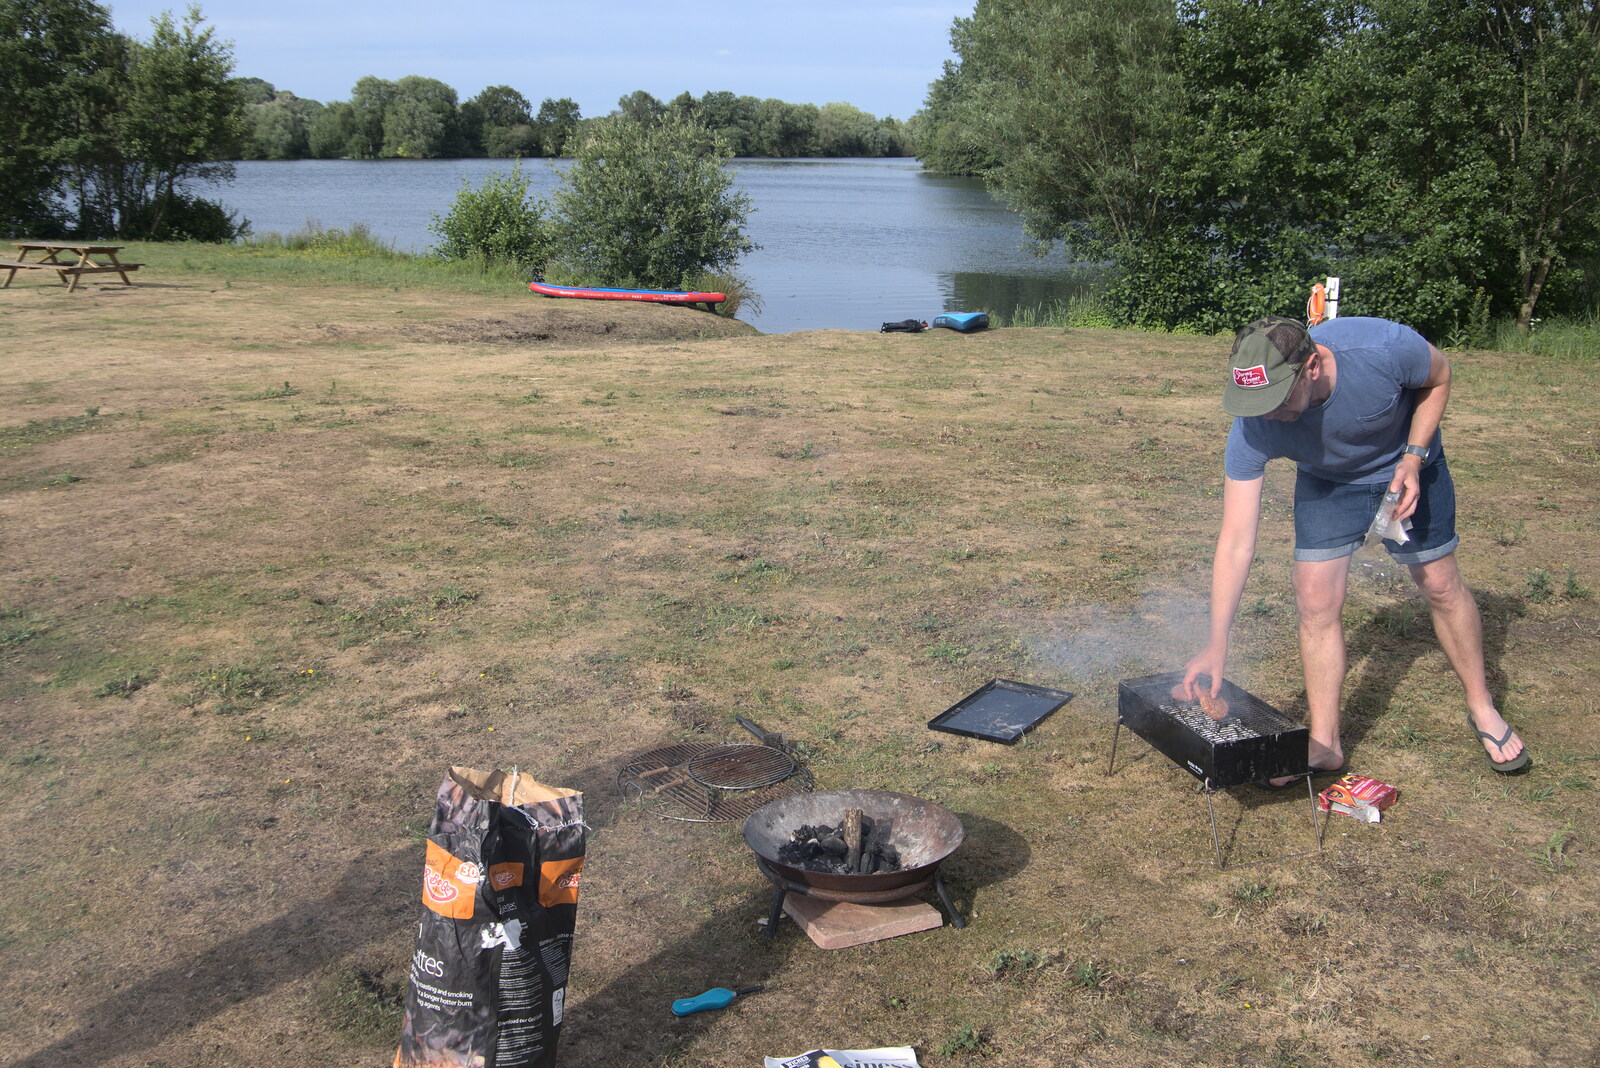 Pete's got a barbeque going from Camping at the Lake, Weybread, Harleston - 25th June 2022